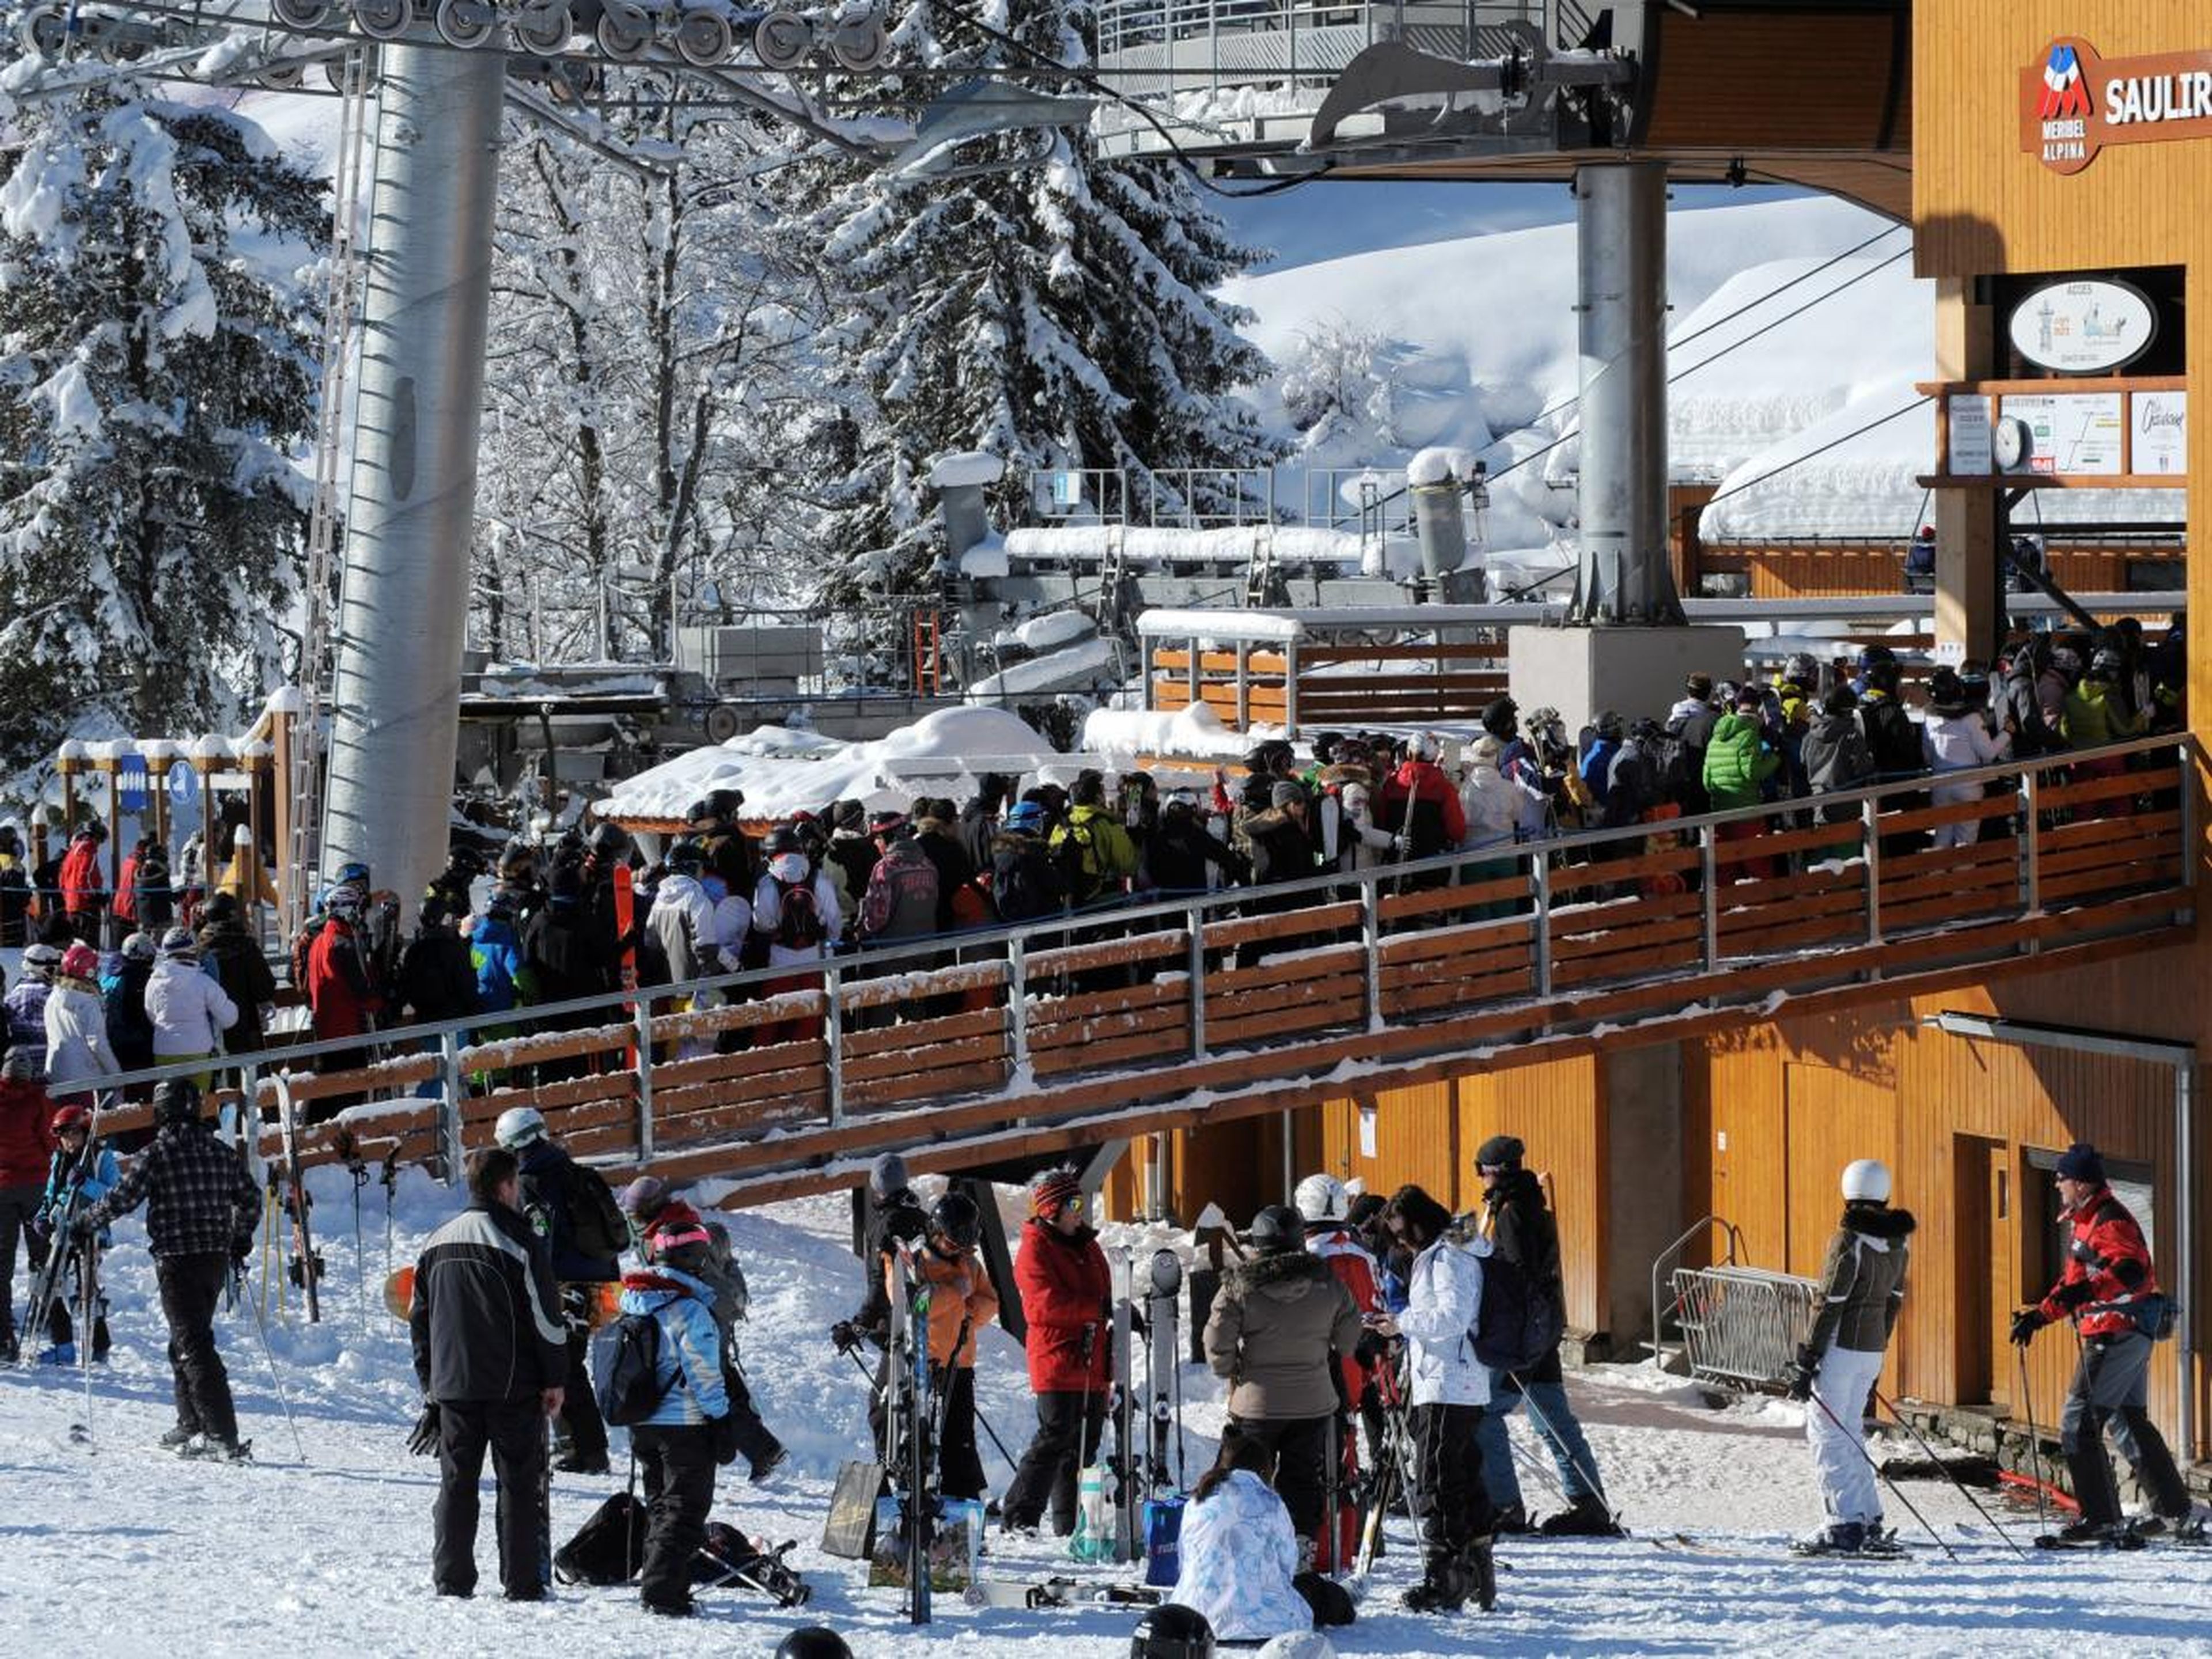 While these packages may save you some money on lift tickets, the crowds at these popular resorts can be unbearable, especially during holiday weekends.